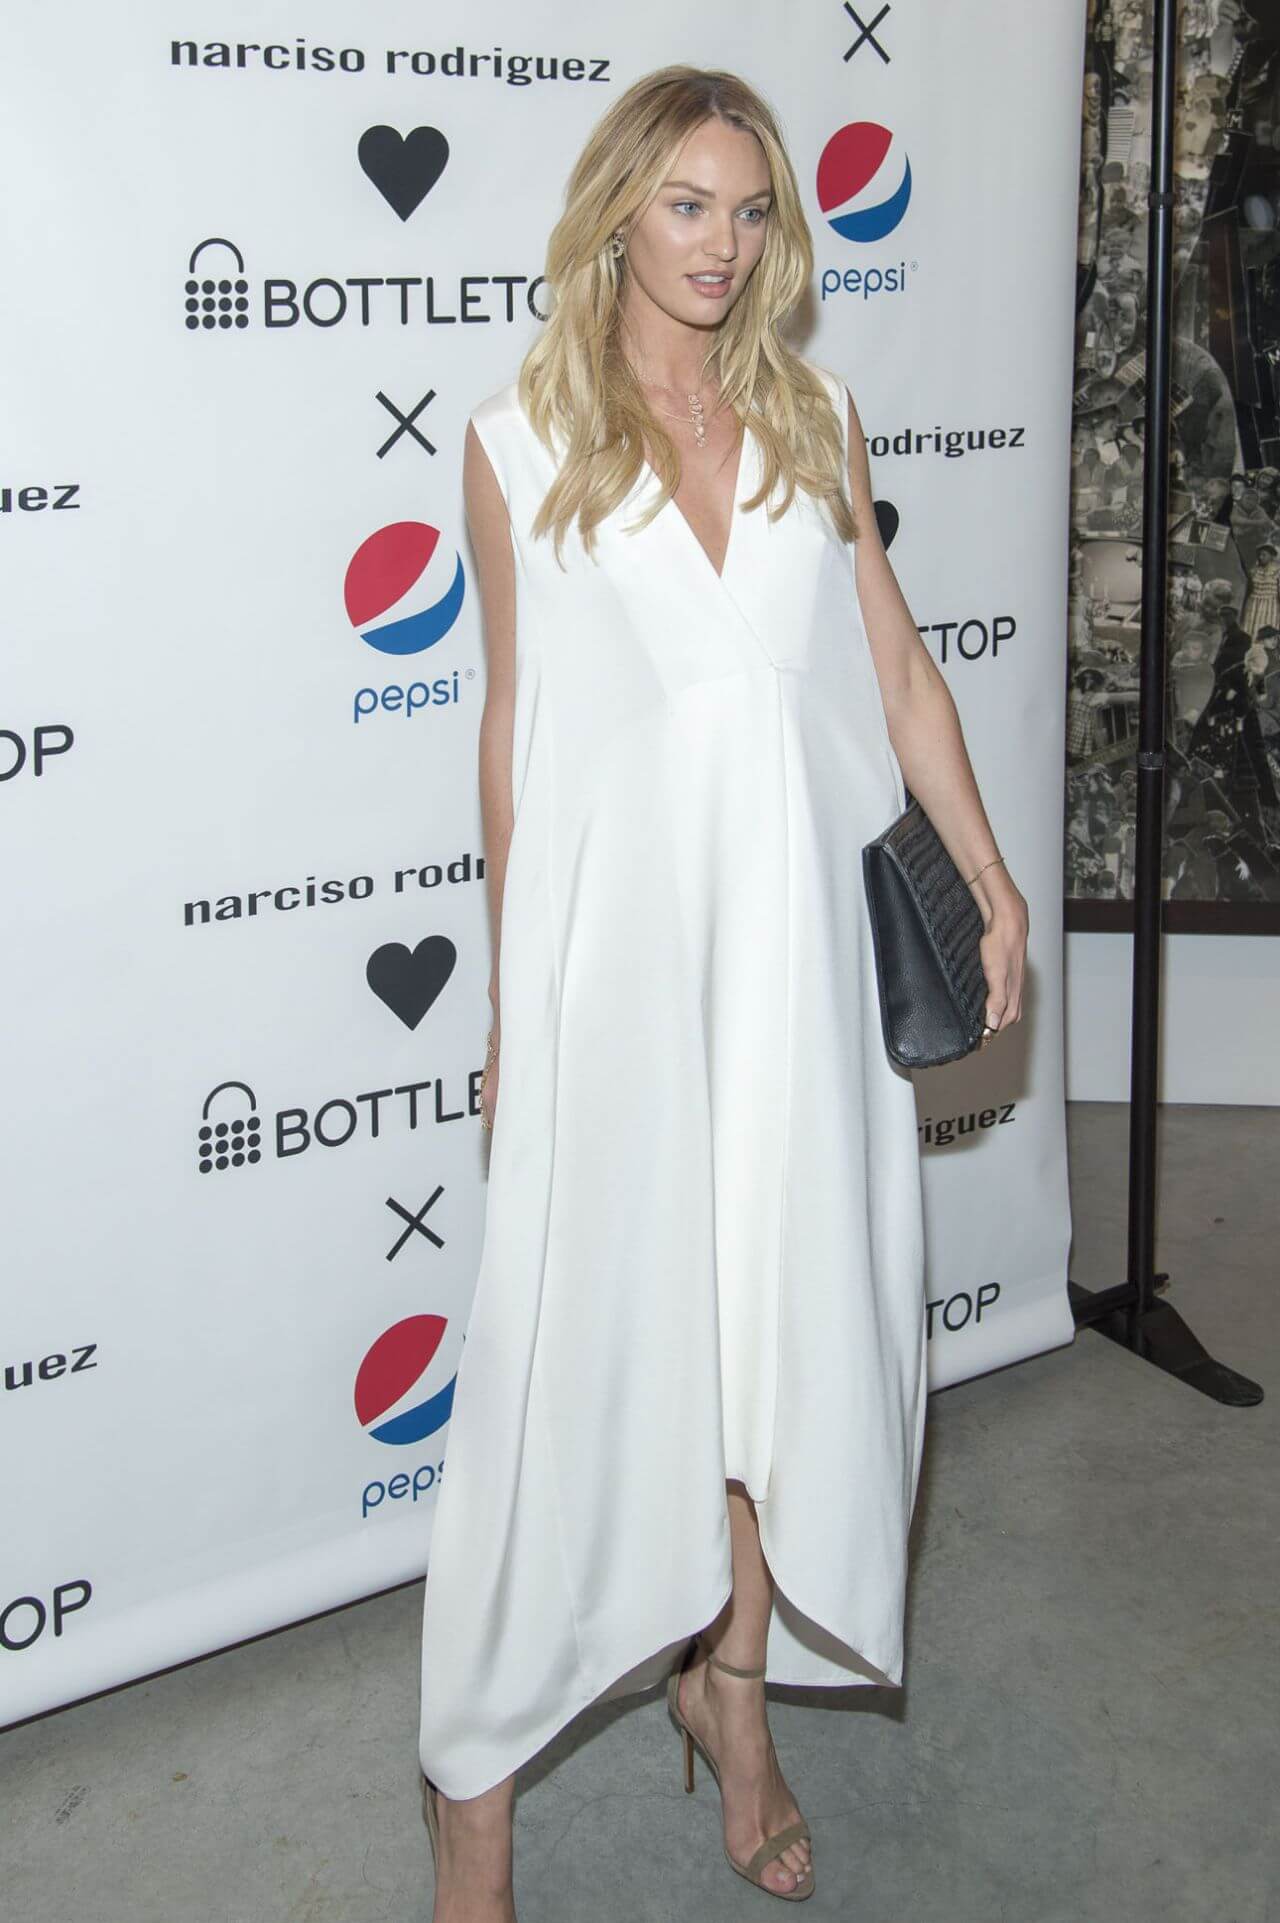 Candice Swanepoel  In White Sheering Long Dress At Narciso Rodriguez Bottletop Collection Pepsi Launch in New York City